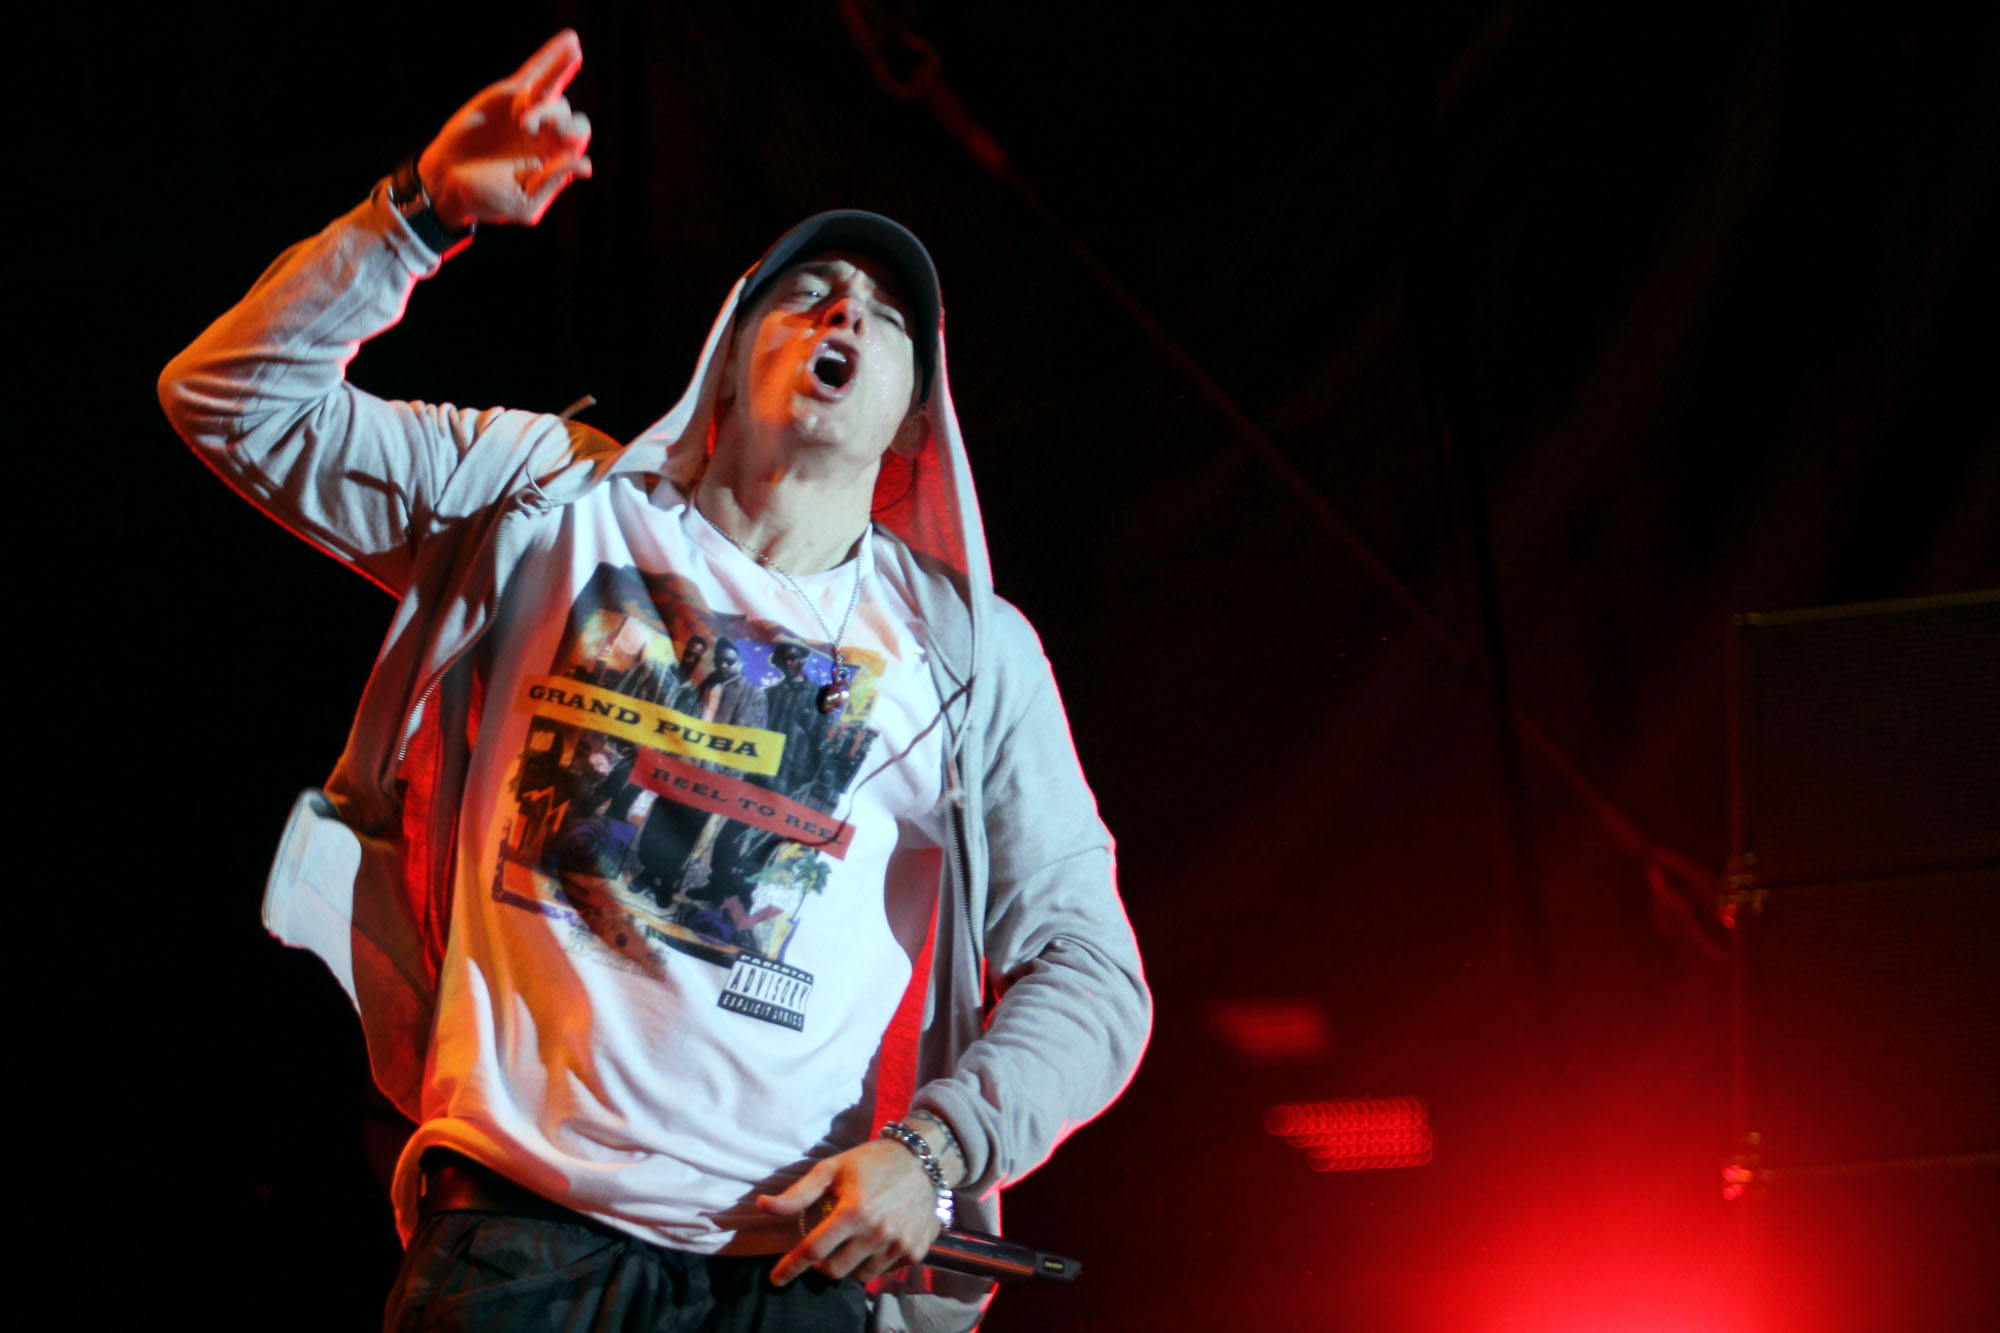 Eminem - The Real Slim Shady (The Up In Smoke Tour) 